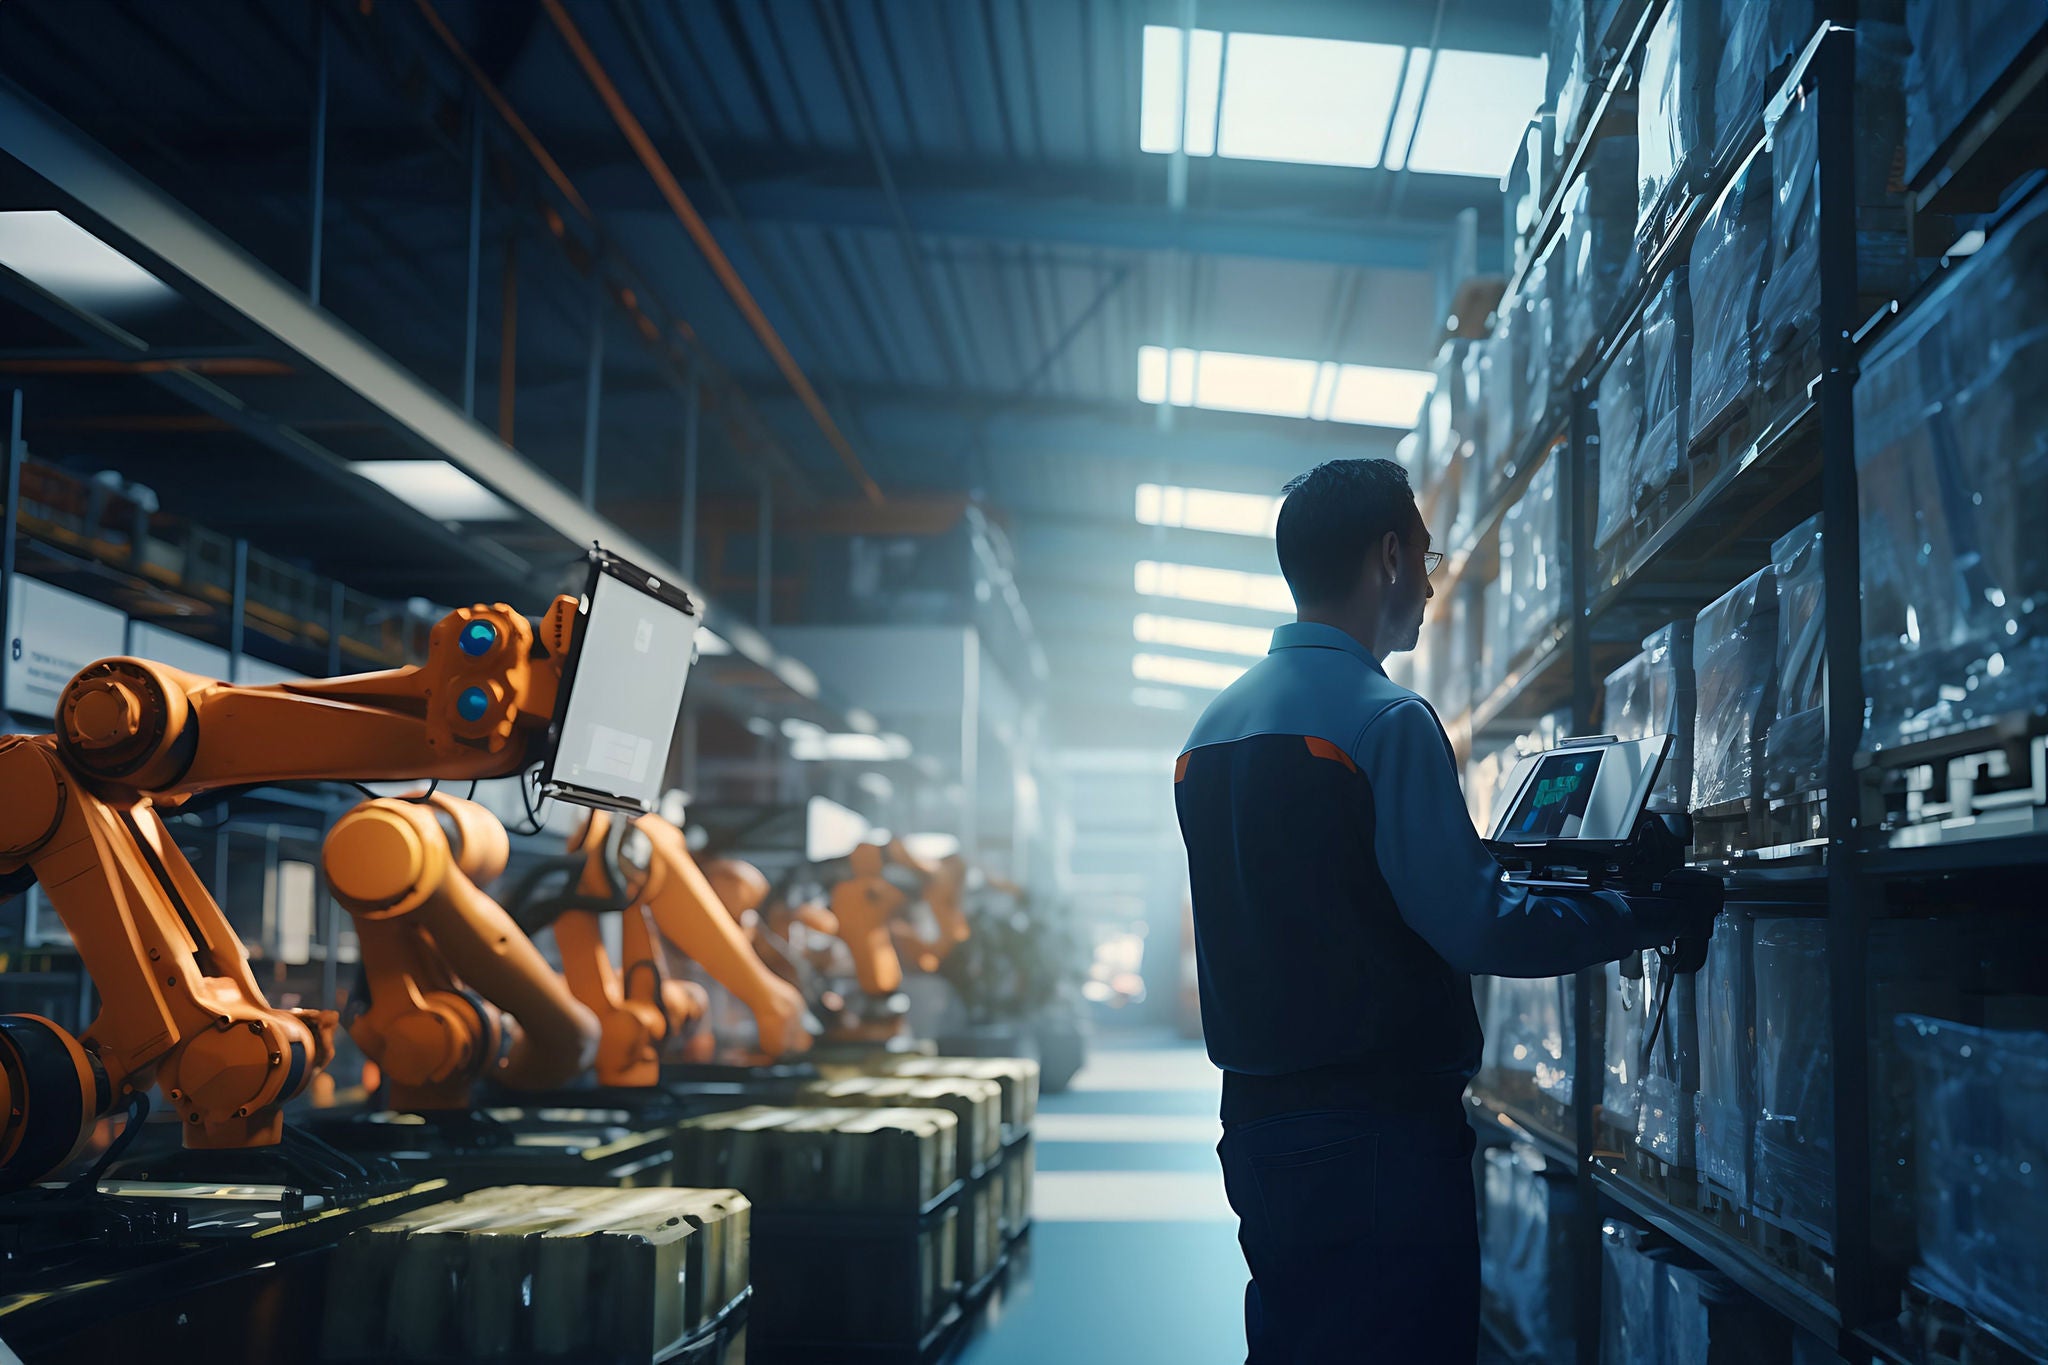 ey engineer check and control automation robot arms machine in modern warehouse